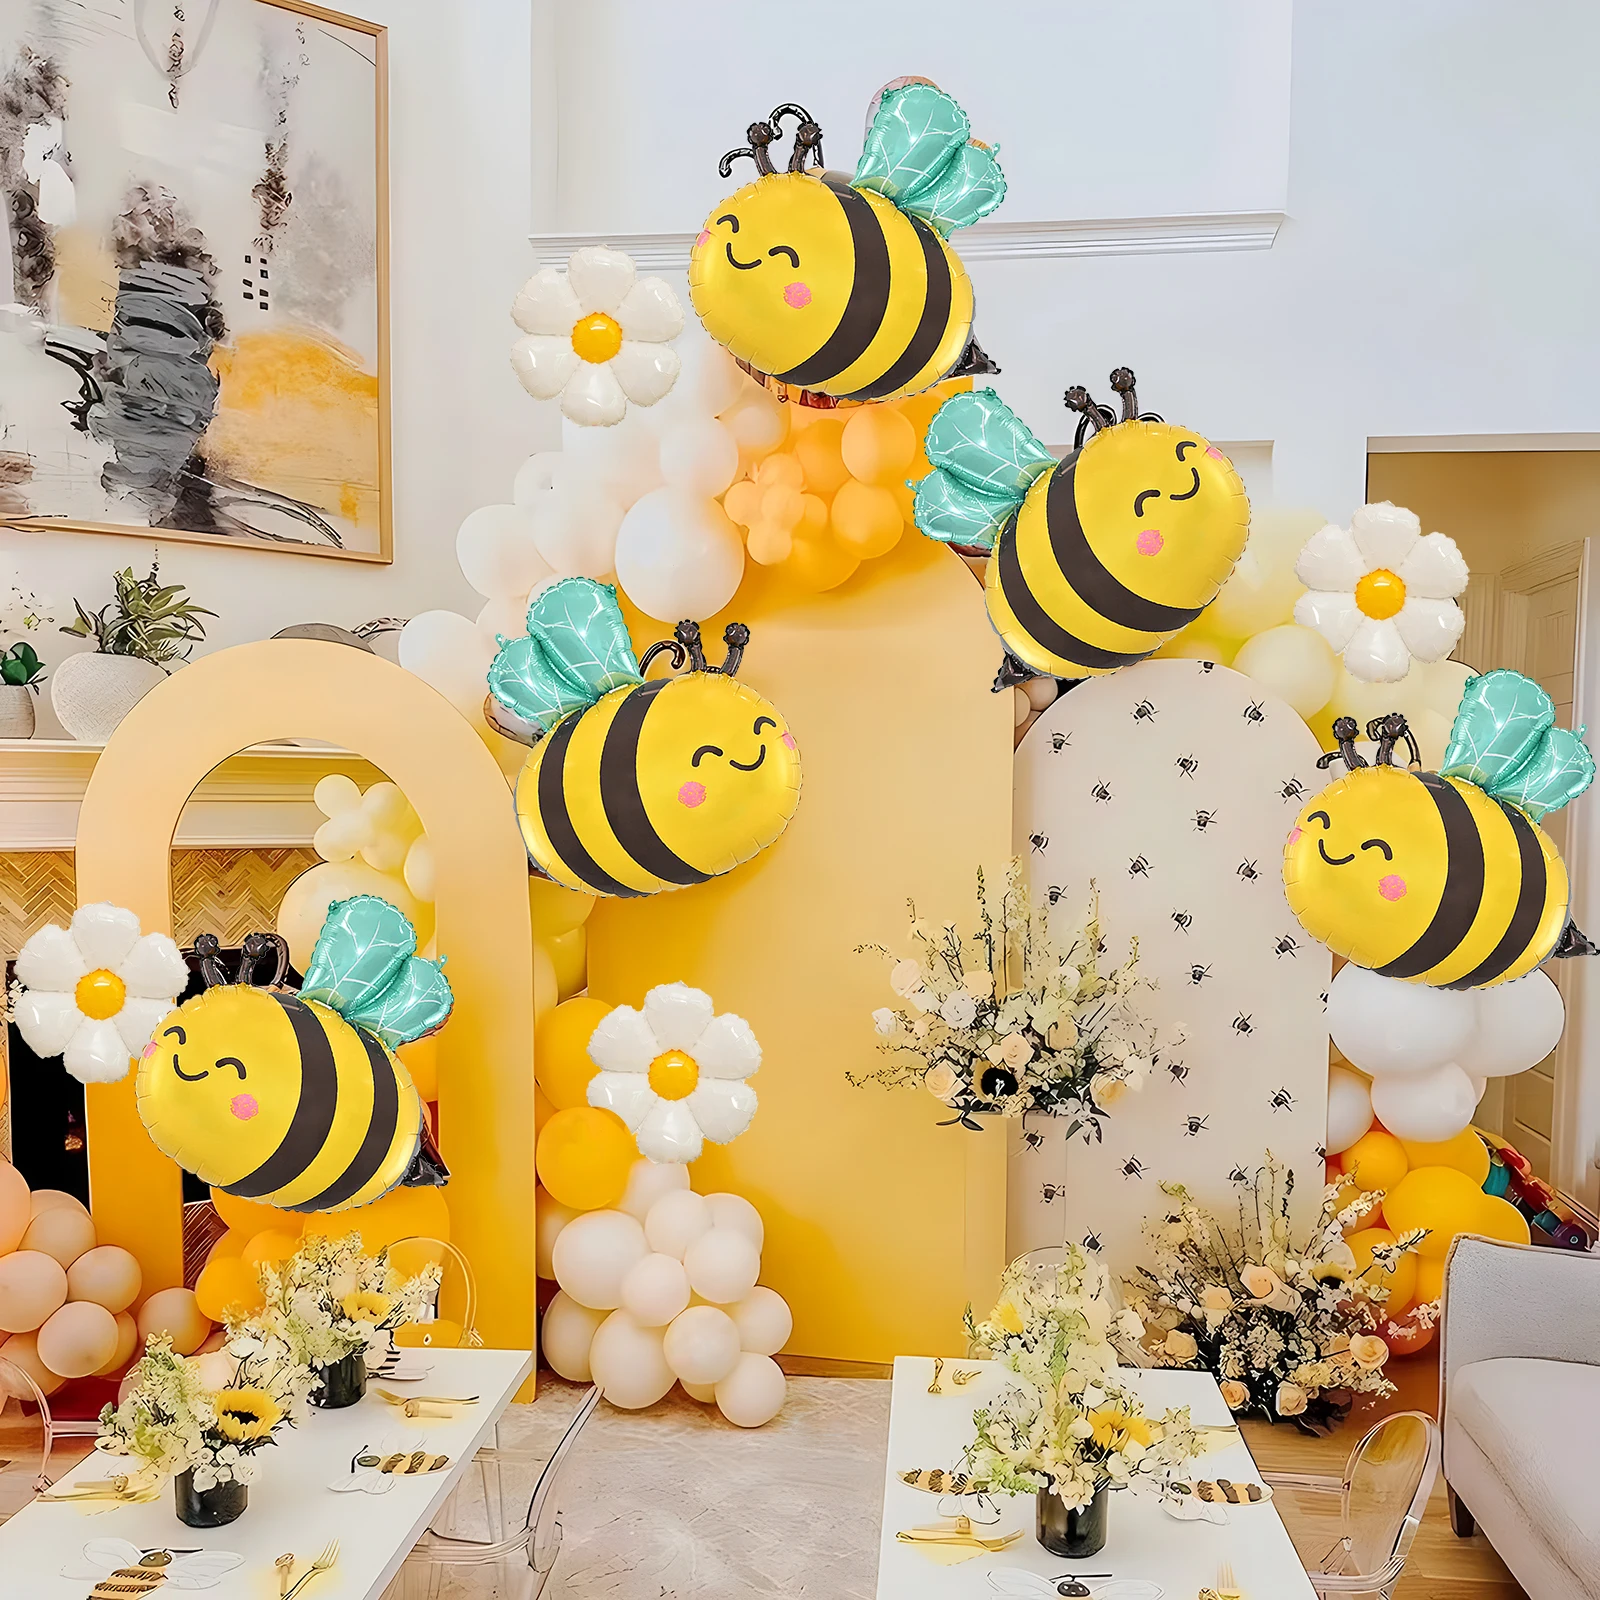 Bumble Bee Birthday Decorations  Bumble Bee Party Decorations - Balloons  Animal - Aliexpress